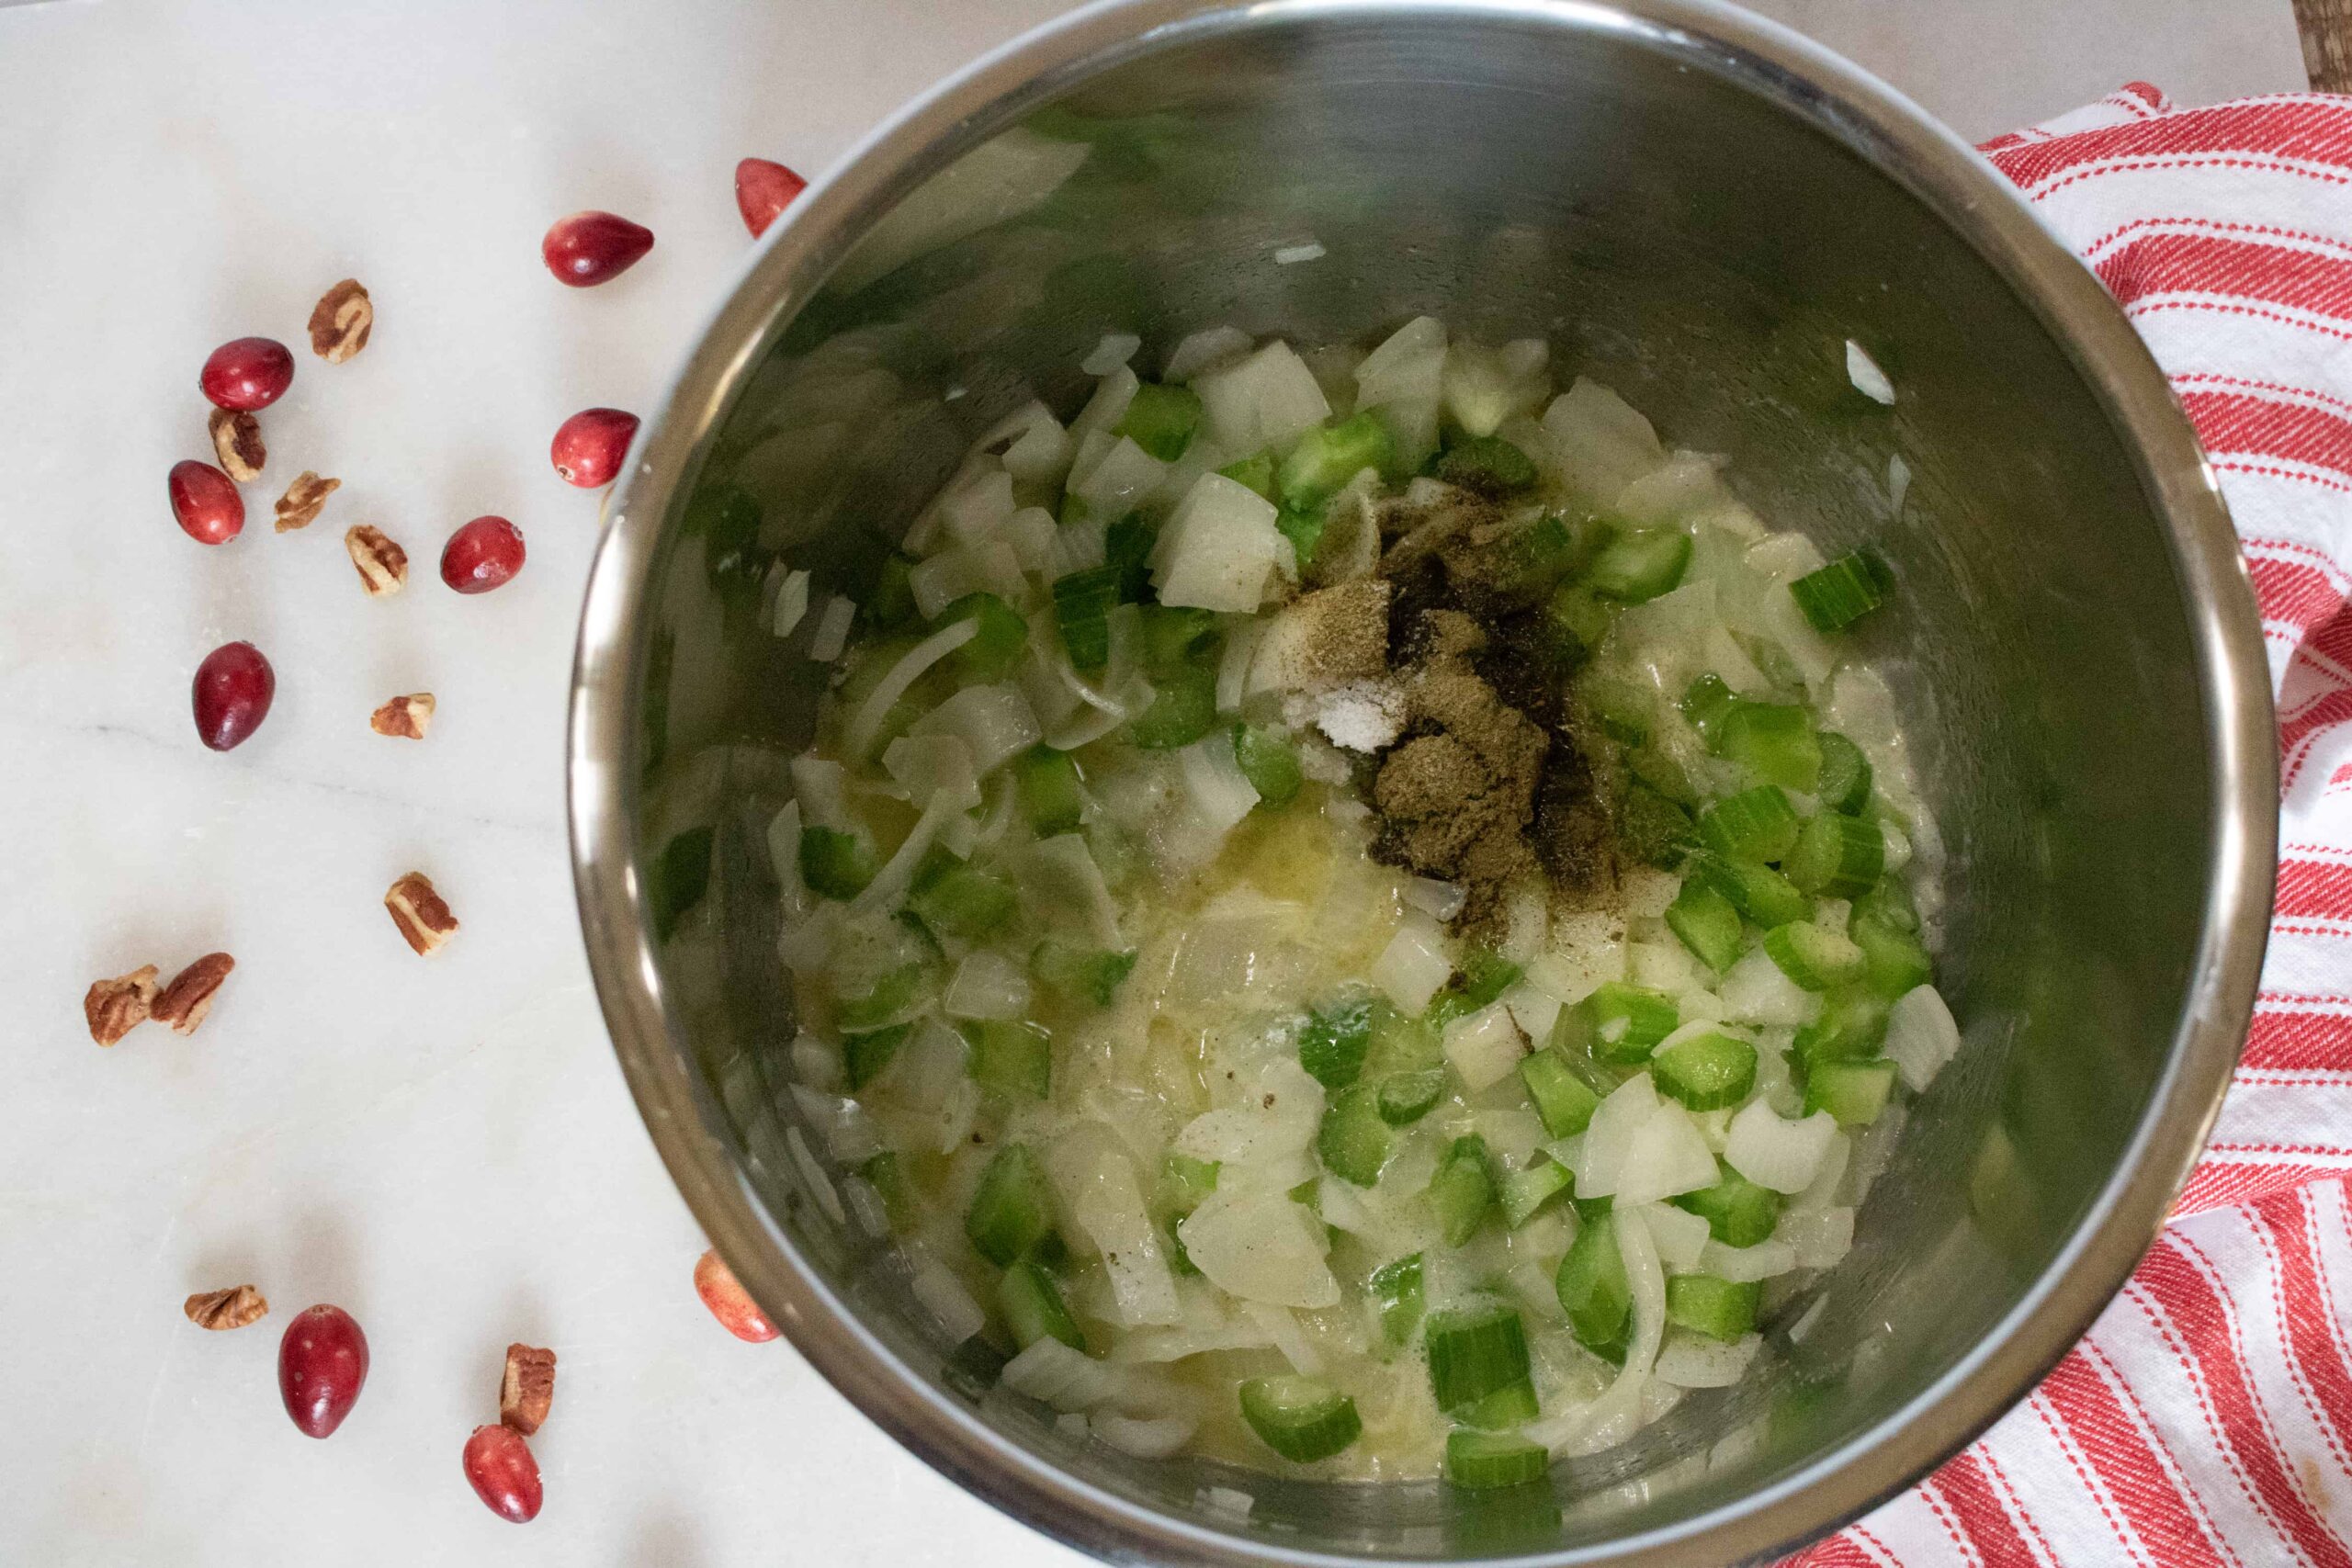 Diced onion, chopped celery, butter, and seasonings being sauted in the Instant Pot inner pot